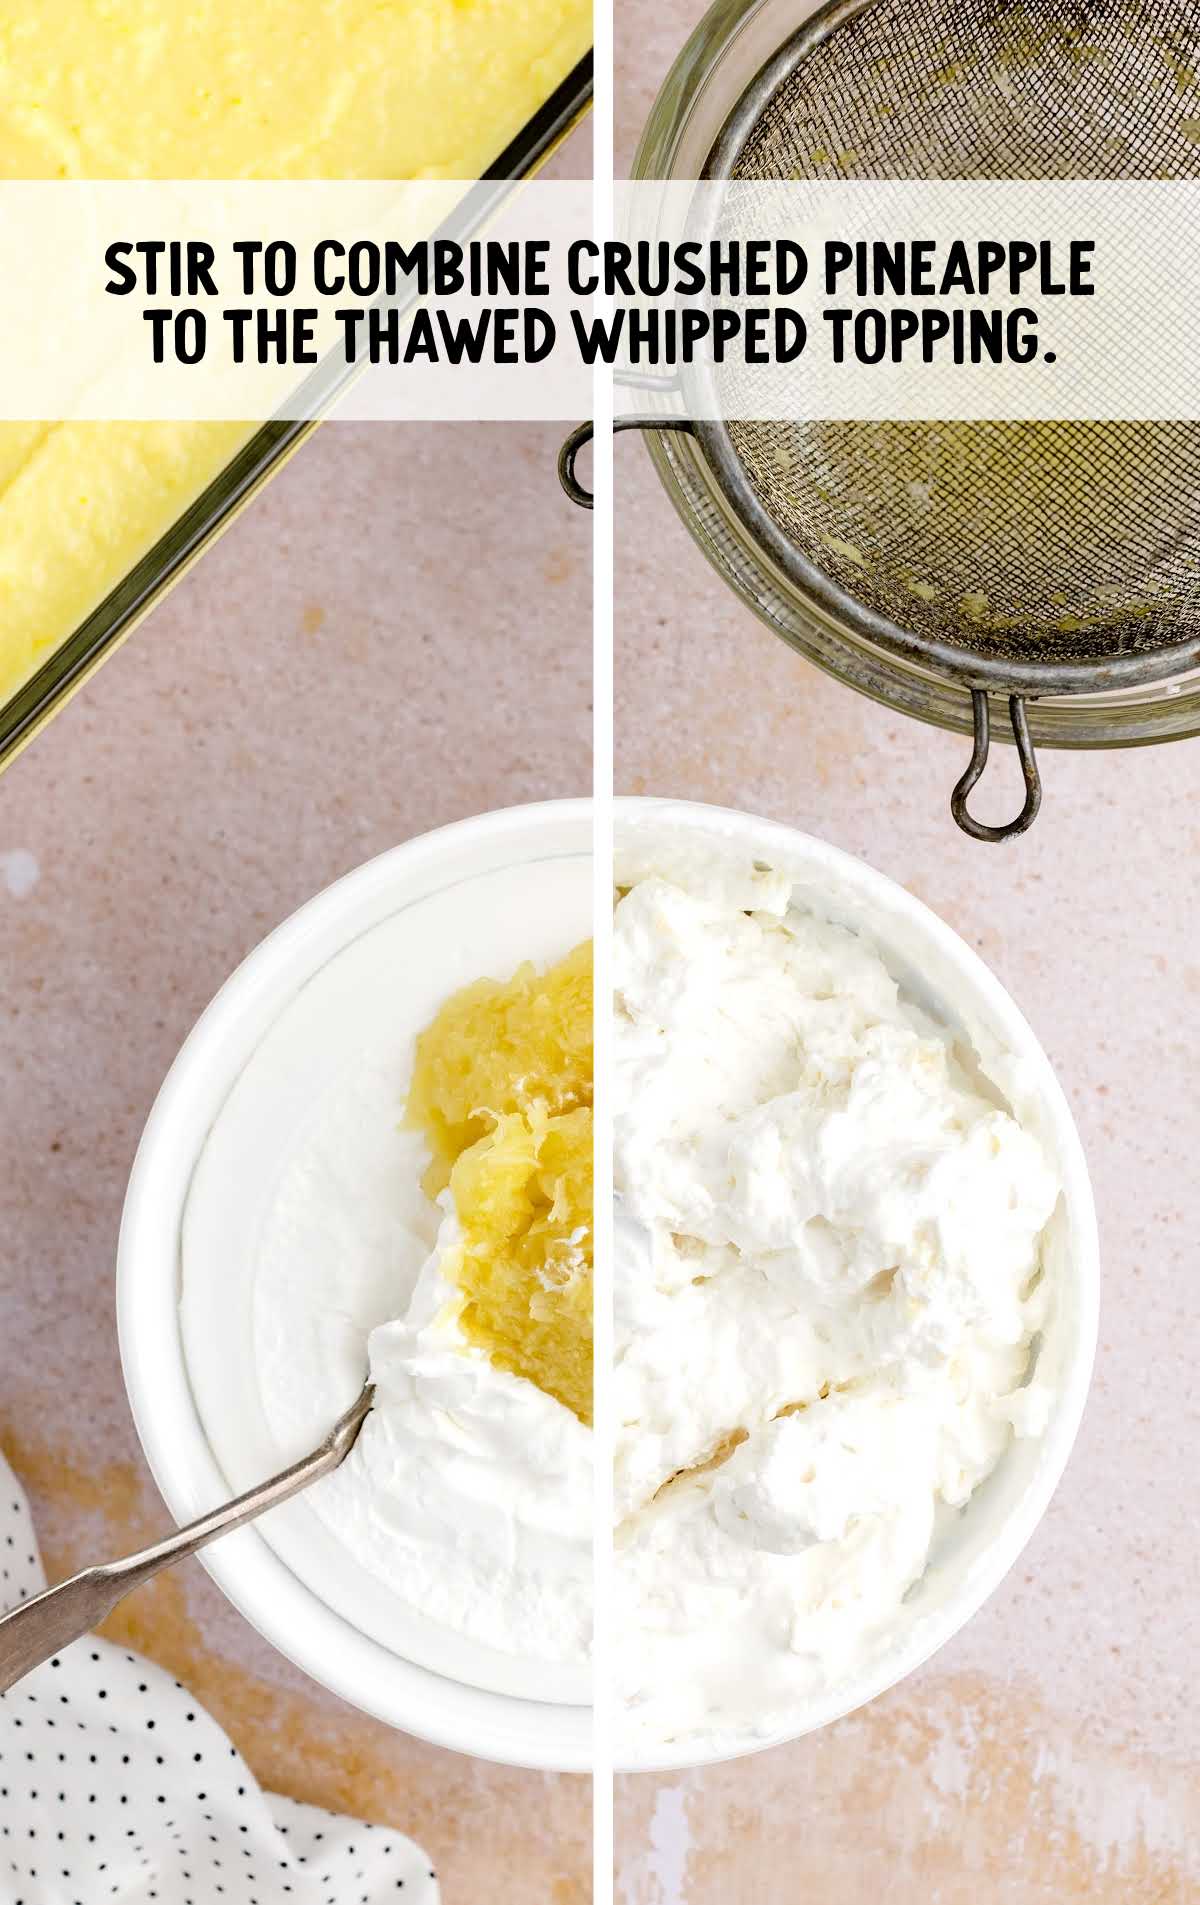 crushed pineapples stirred to the thawed whipped topping